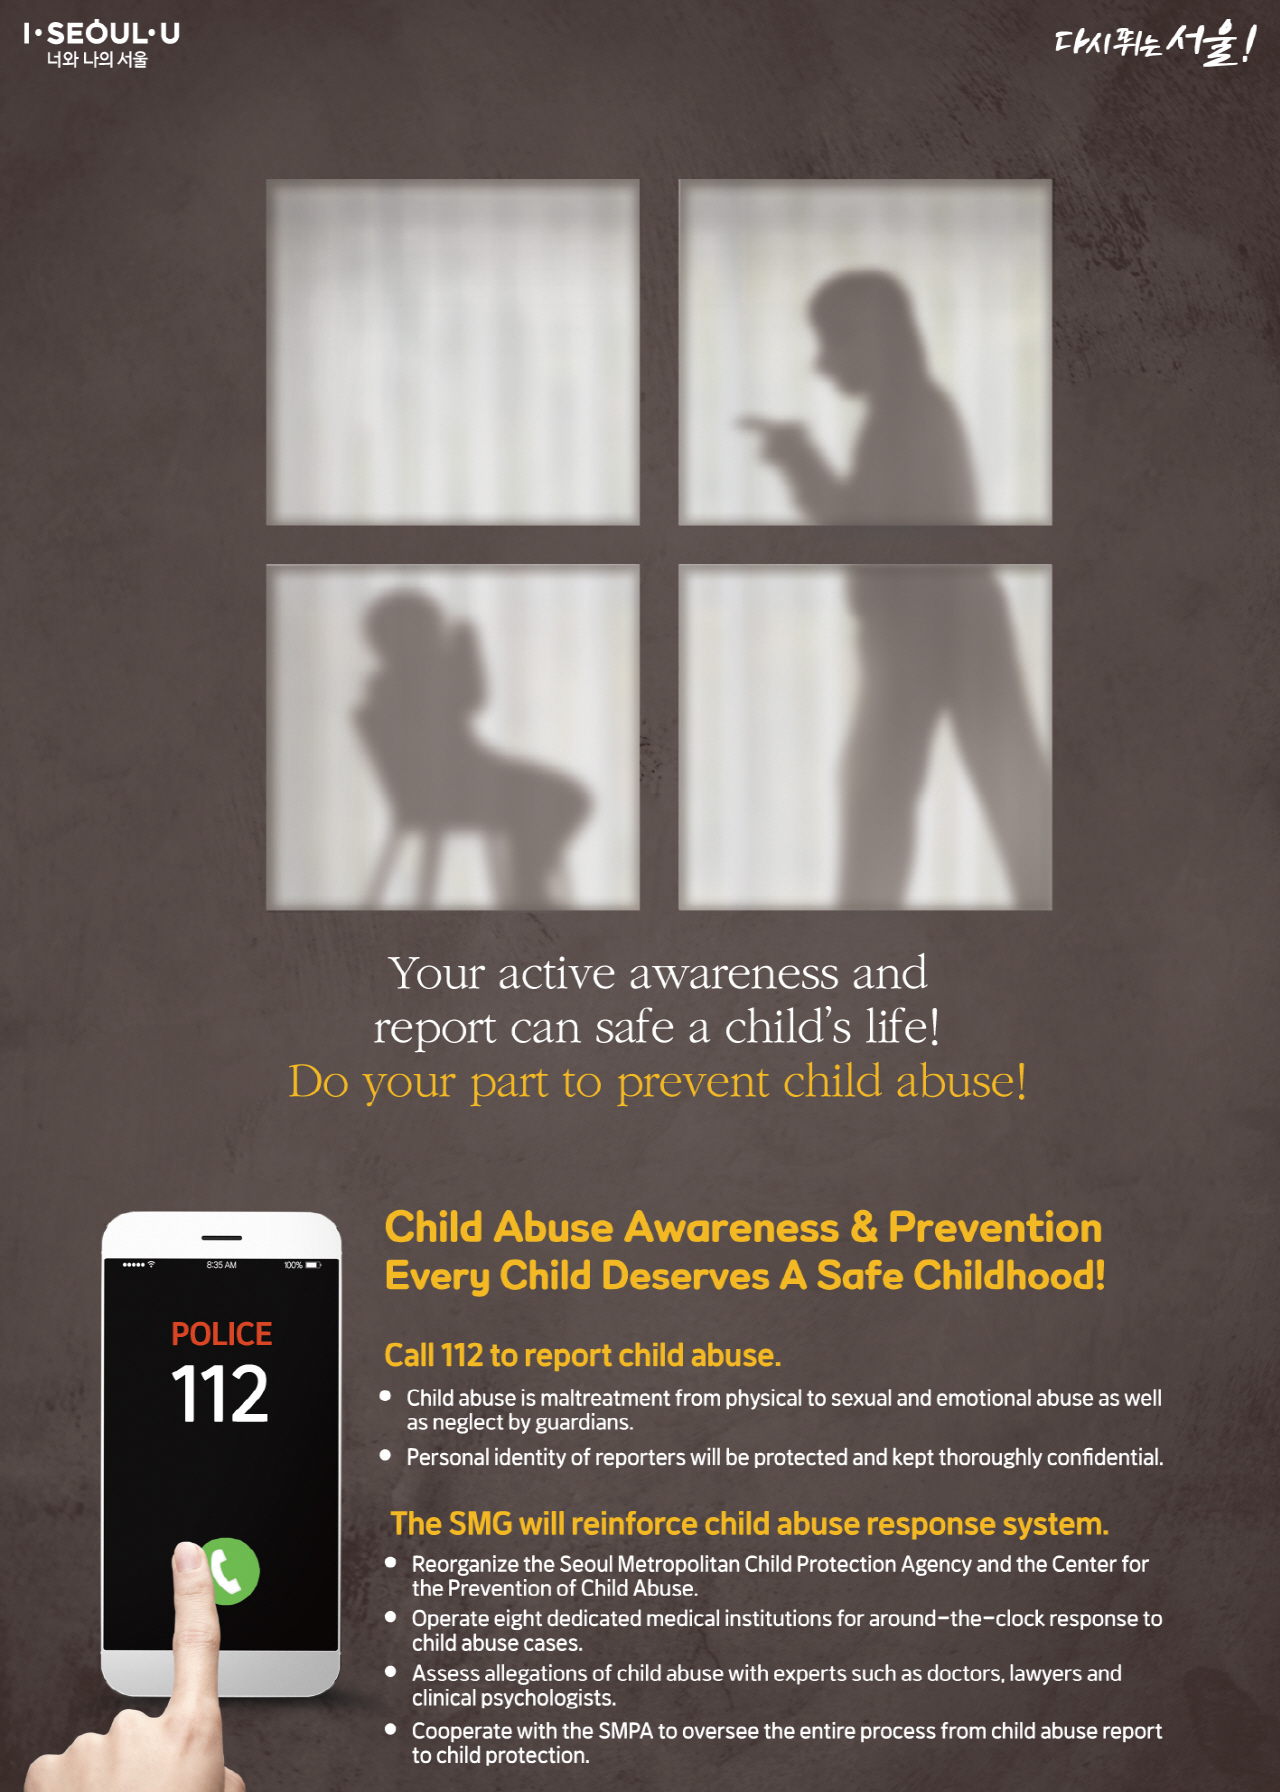 Child Abuse Awareness & Prevention Every Child Deserves A Safe Childhood! Your active awareness and report can safe a child’s life! Do your part to prevent child abuse! POLICE 112 Call 112 to report child abuse. Child abuse is maltreatment from physical to sexual and emotional abuse as well as neglect by guardians. Personal identity of reporters will be protected and kept thoroughly confidential. The SMG will reinforce child abuse response system: reorganize the Seoul Metropolitan Child Protection Agency and the Center for the Prevention of Child Abuse. operate eight dedicated medical institutions for around-the-clock response to child abuse cases. assess allegations of child abuse with experts such as doctors, lawyers and clinical psychologists. cooperate with the SMPA to oversee the entire process from child abuse report to child protection.